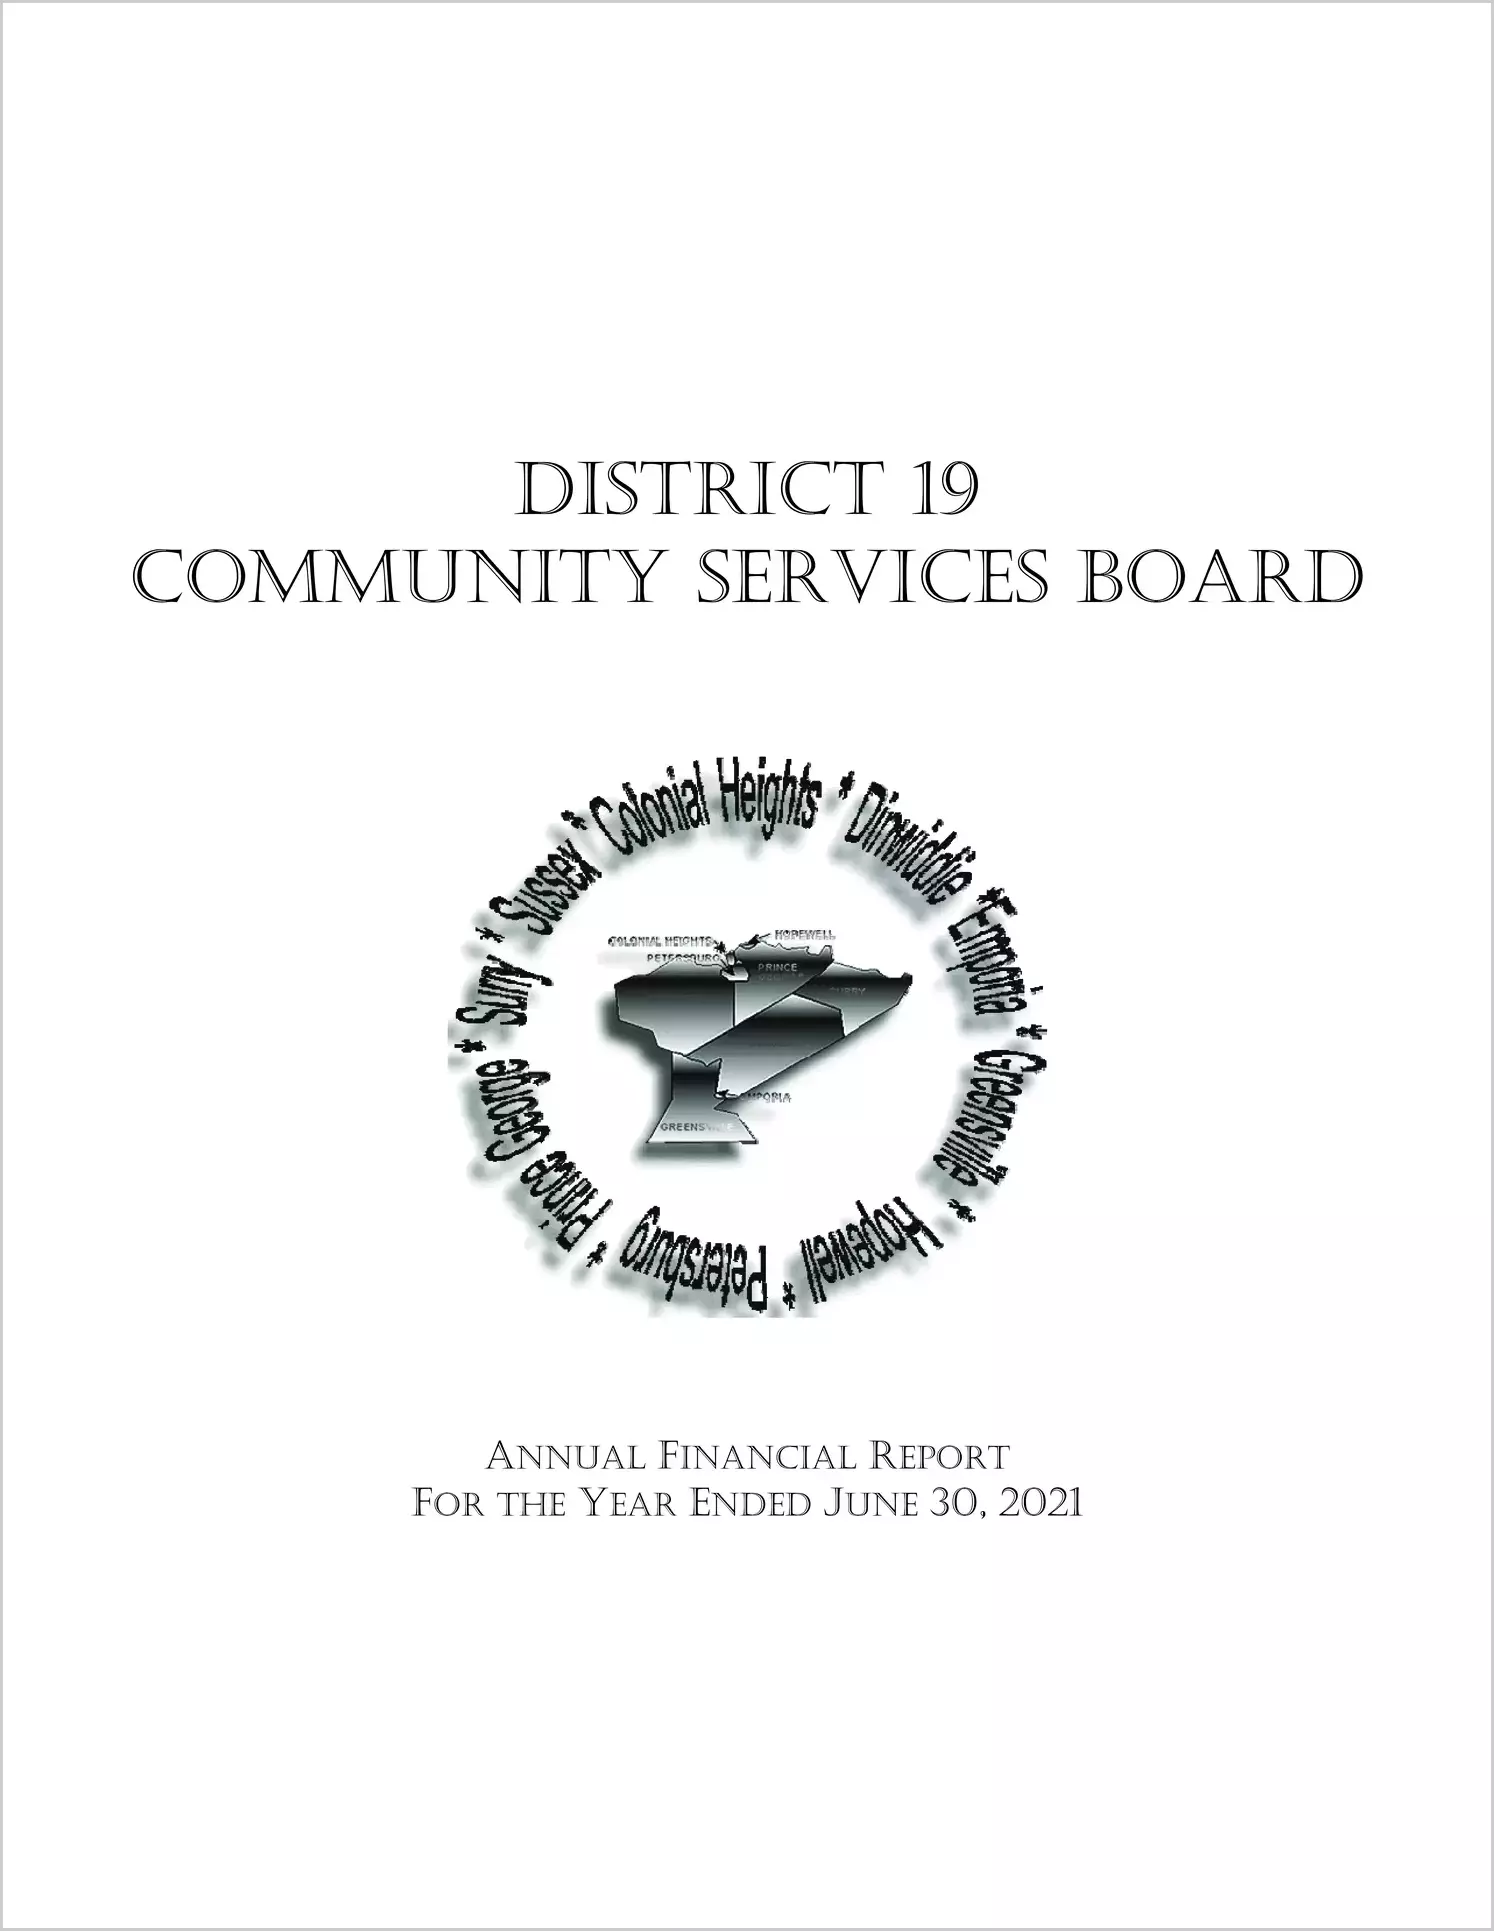 2021 ABC/Other Annual Financial Report  for District 19 Community Services Board